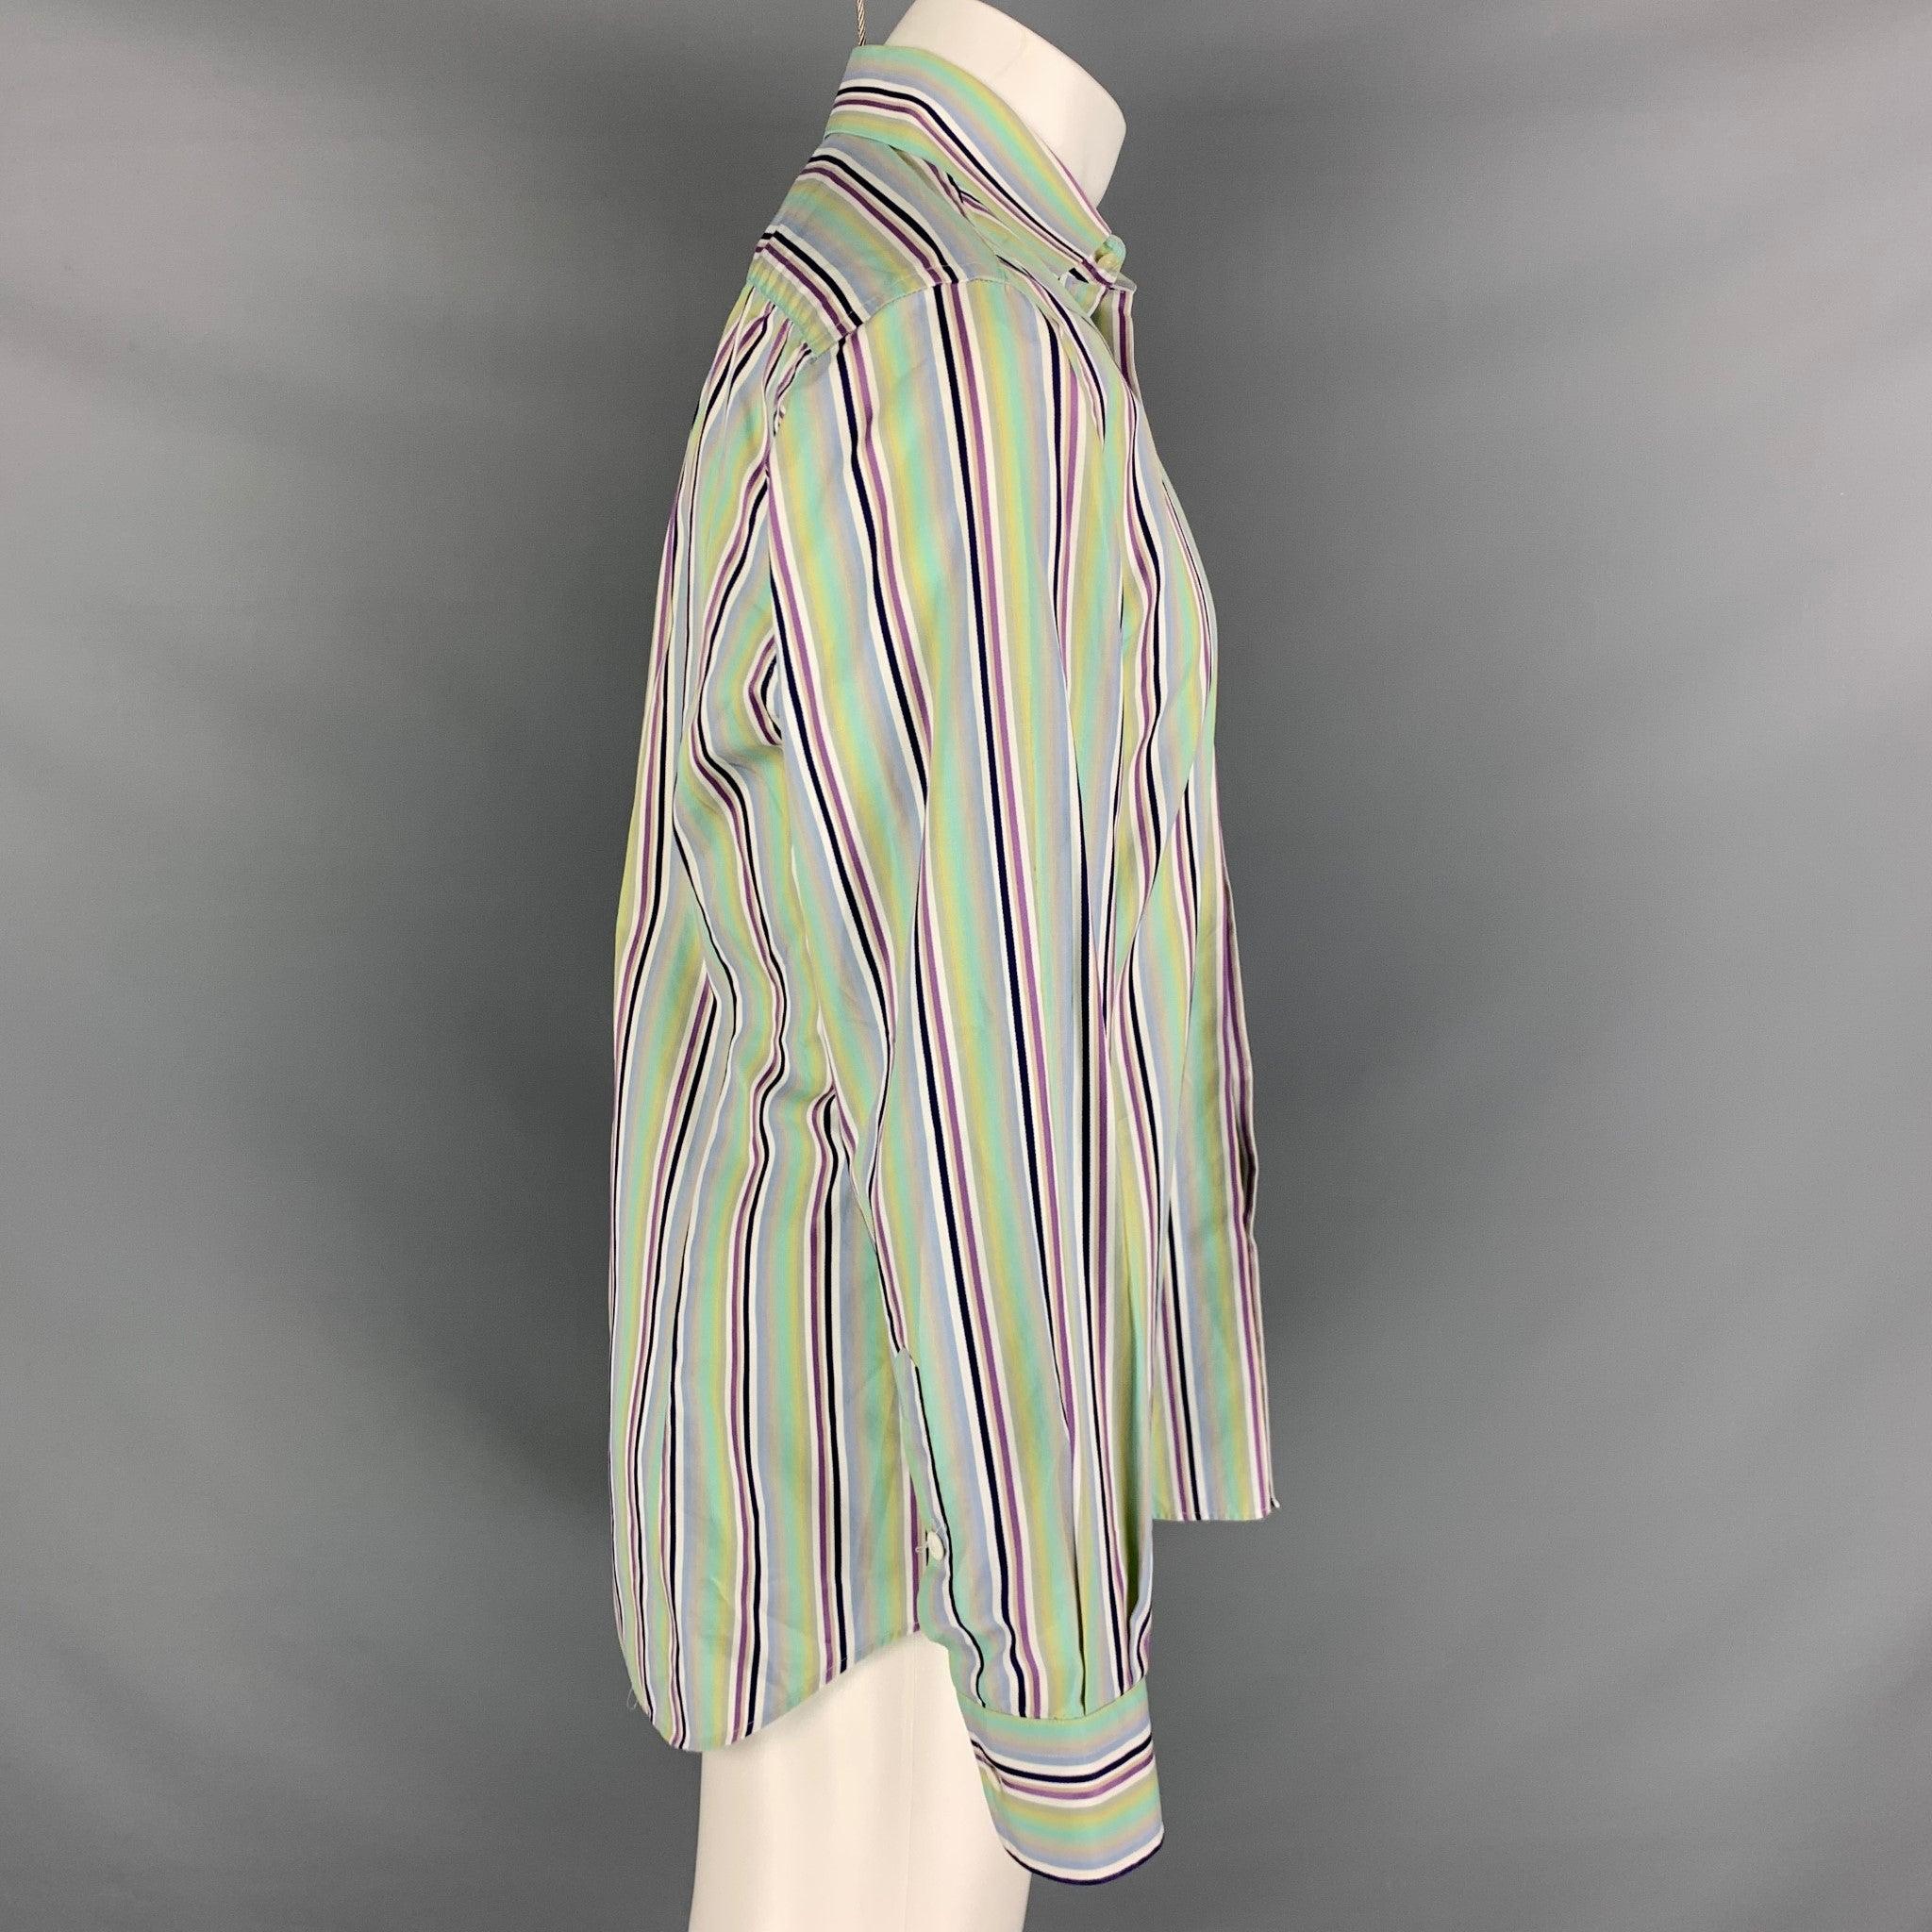 ETRO long sleeve shirt comes in a black, green and purple striped cotton featuring a button down collar, and a button up closure. Made in Italy. Very Good Pre-Owned Condition.
Minor marks. 

Marked:   40 

Measurements: 
 
Shoulder: 18.5 inches